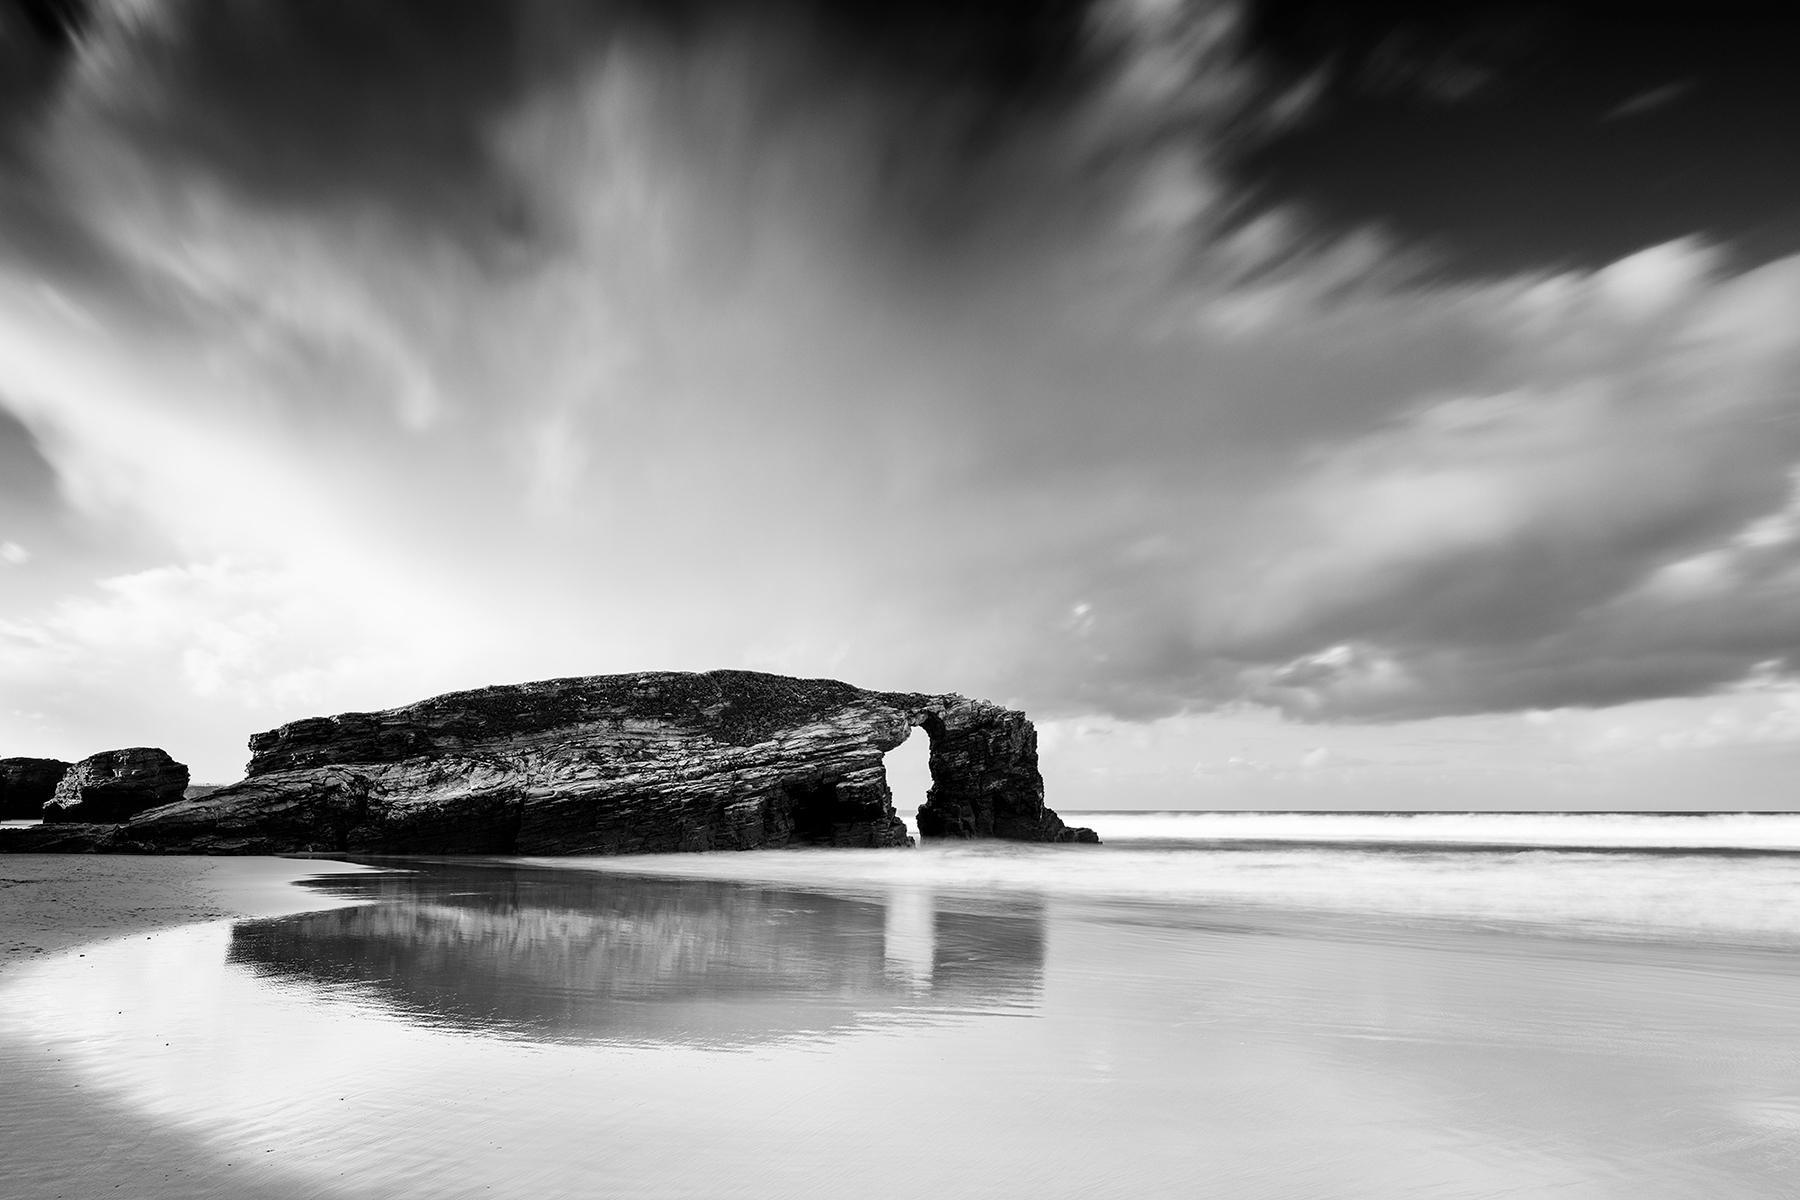 Gerald Berghammer Black and White Photograph - As Catedrais Beach, Panorama, Storm, Spain, black and white fine art photography